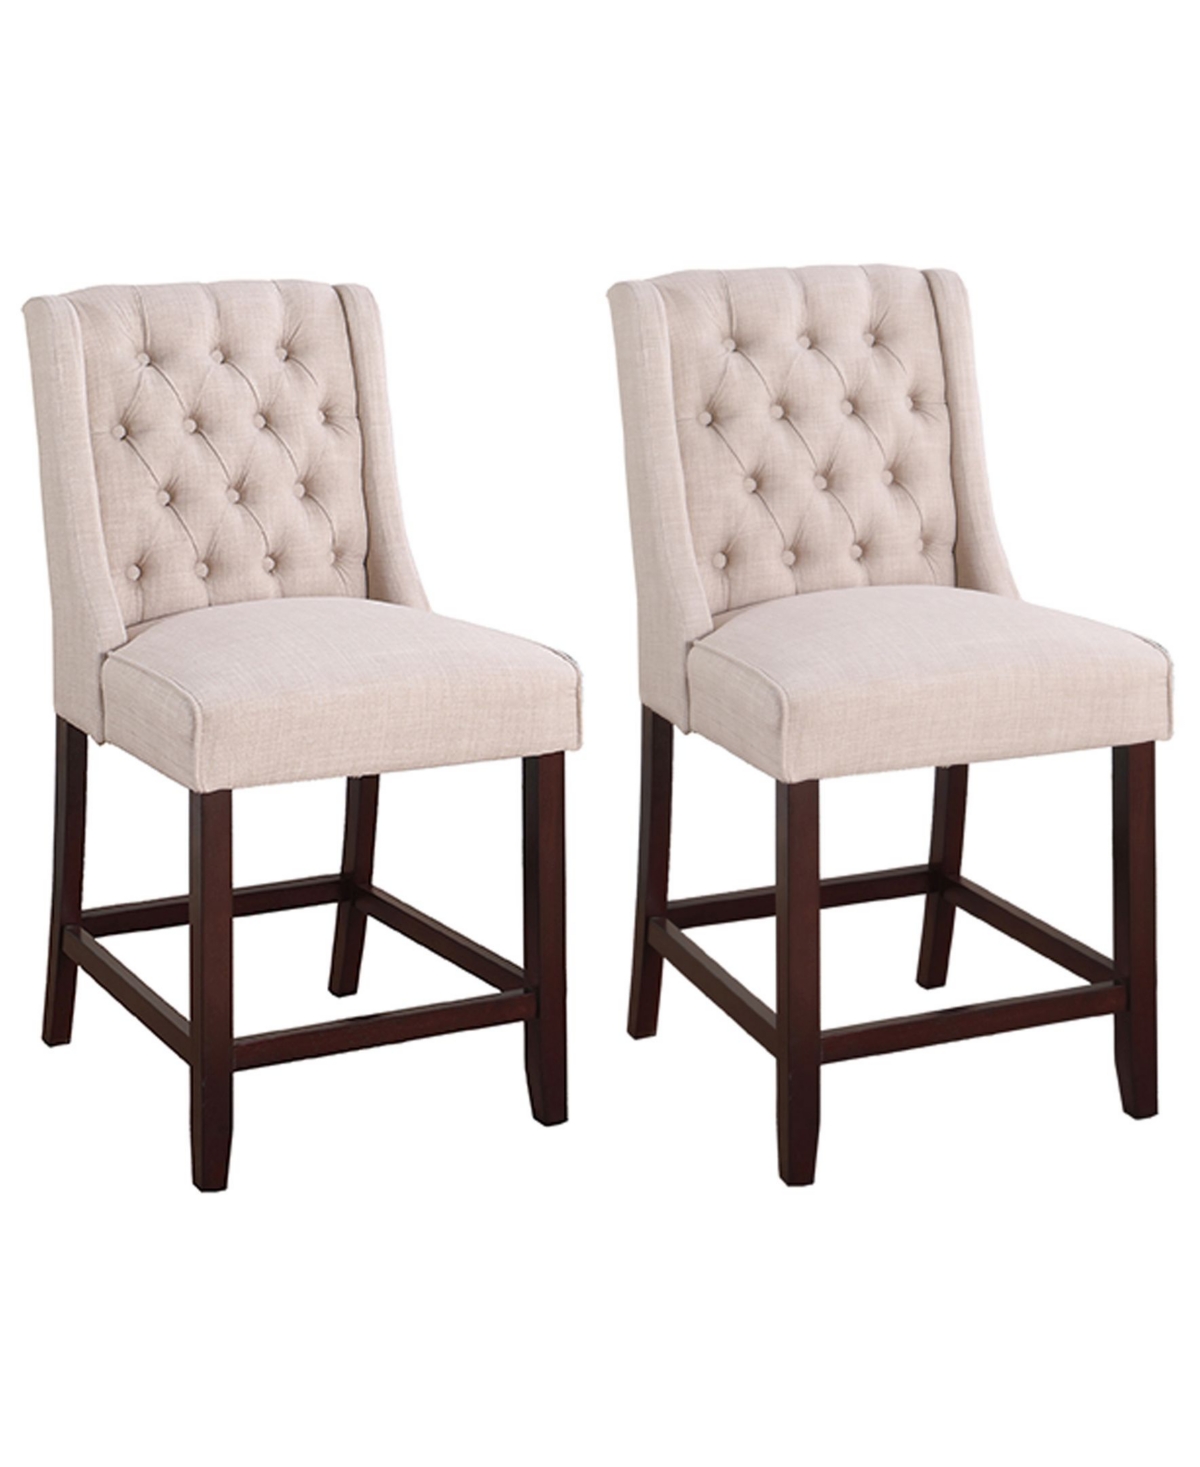 Best Master Furniture Newport Upholstered Bar Chairs With Tufted Back, Set Of 2 In Beige